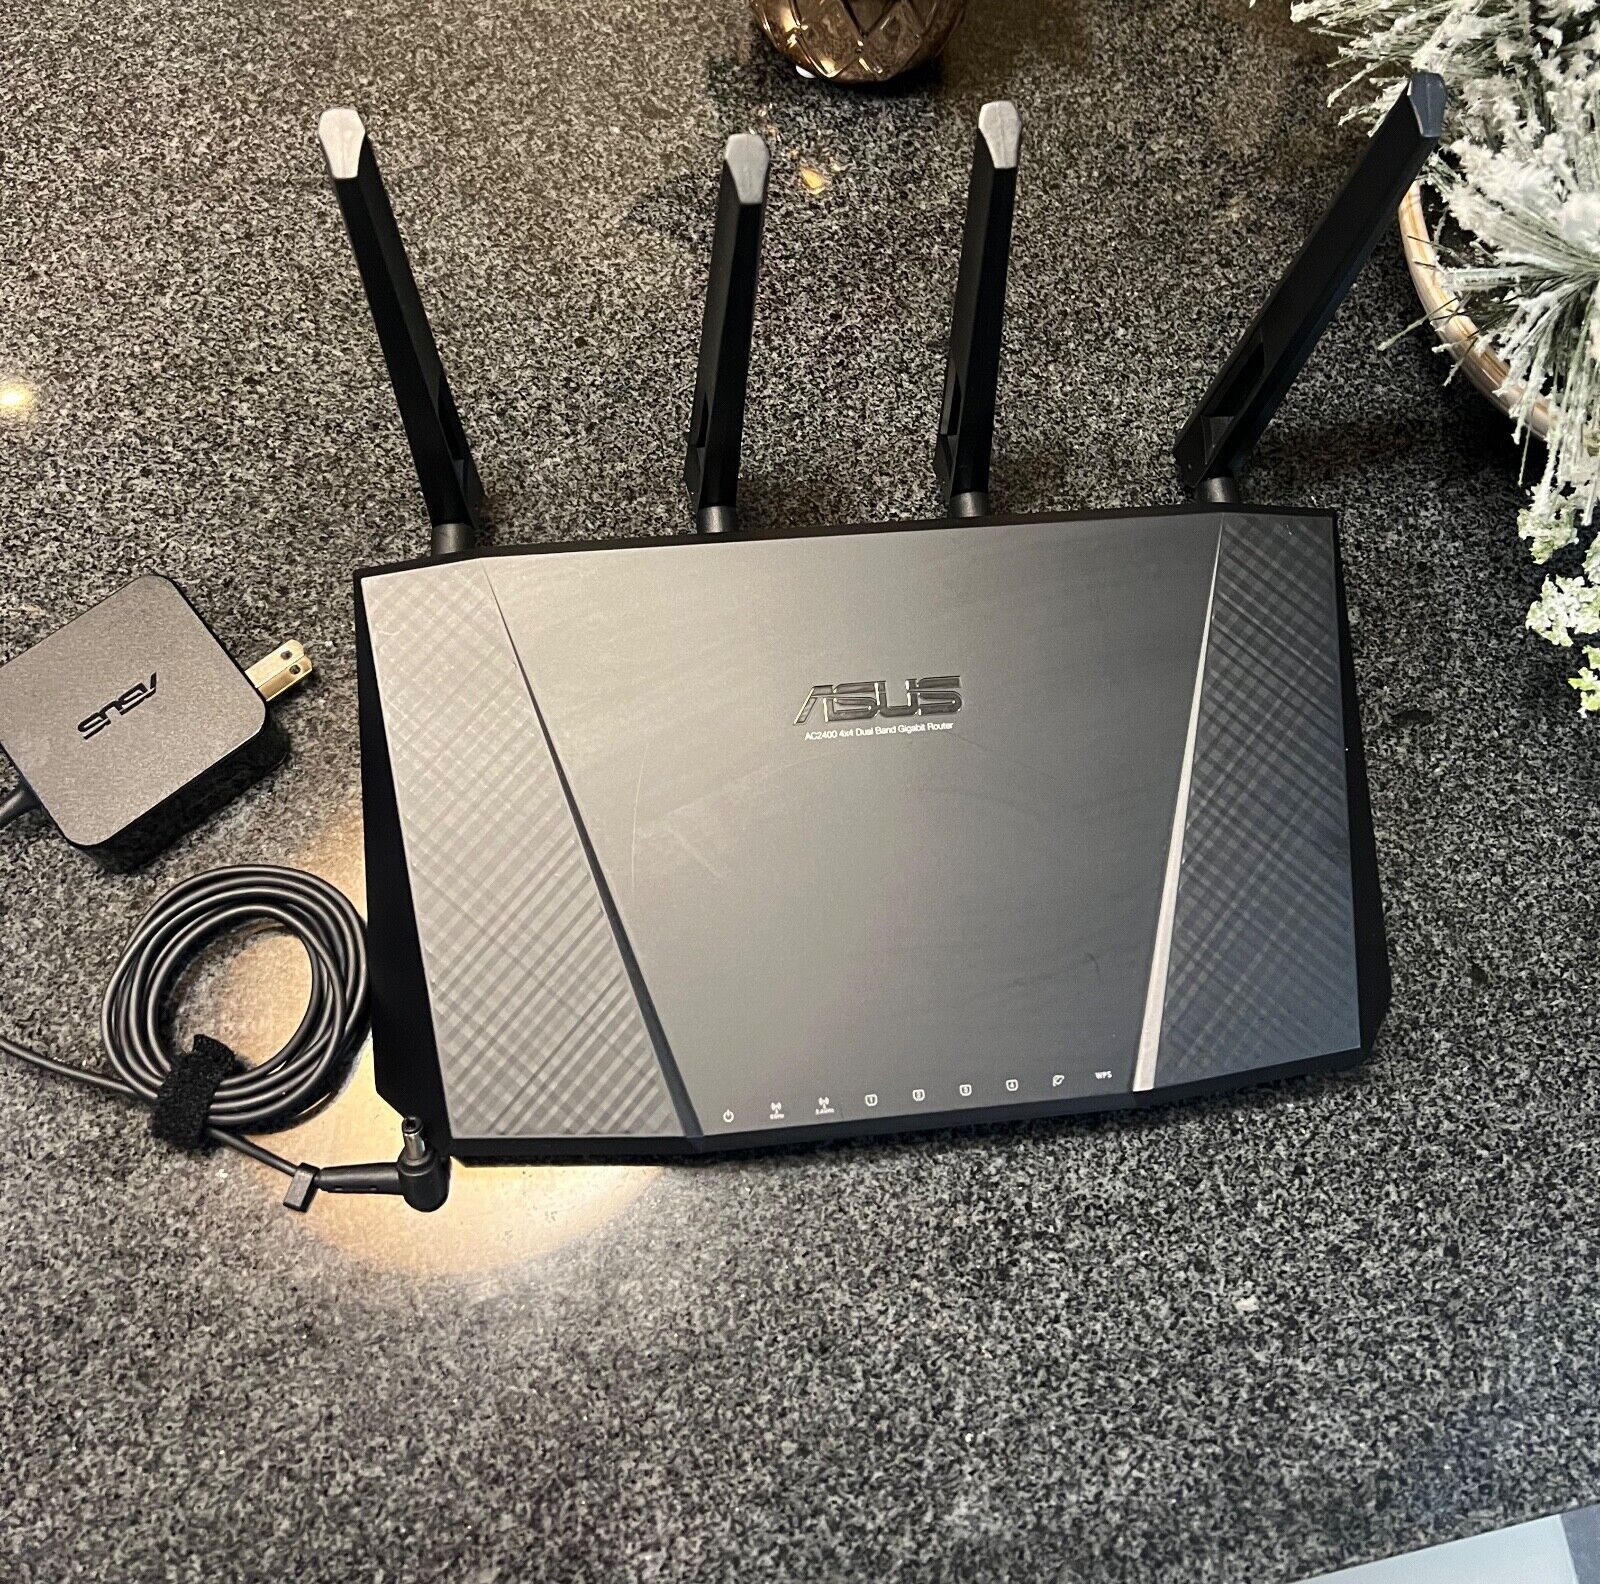 Asus AC2400 RT-AC87R Dual Band Wireless Dual Band Gigabit Router.